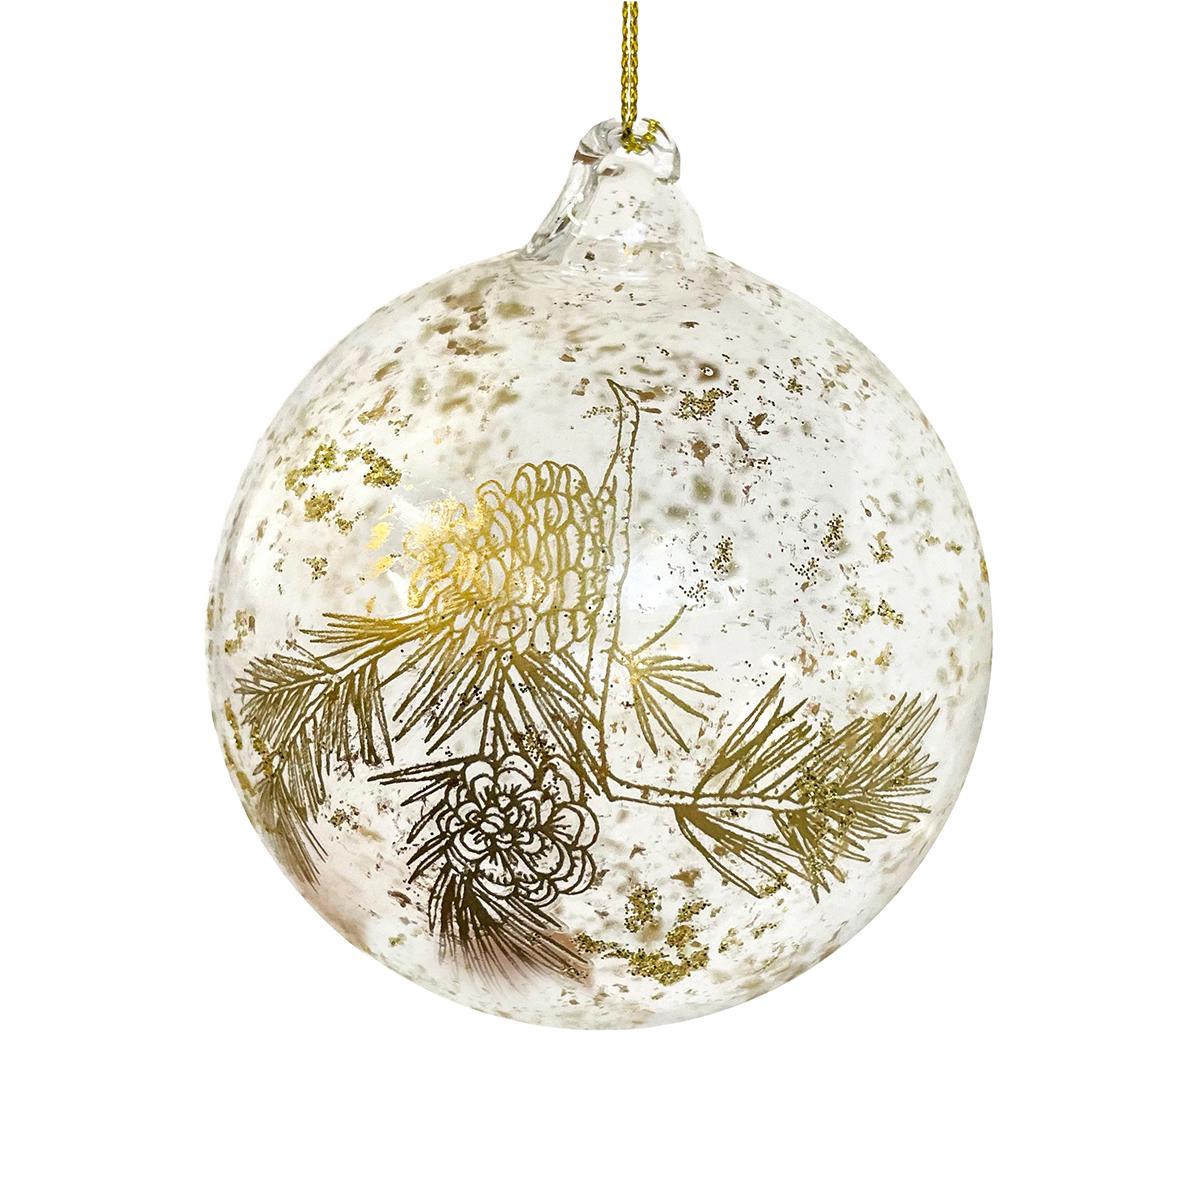 Glass Ball With Gold Fir Branch Print And Gold Leaf 8Cm